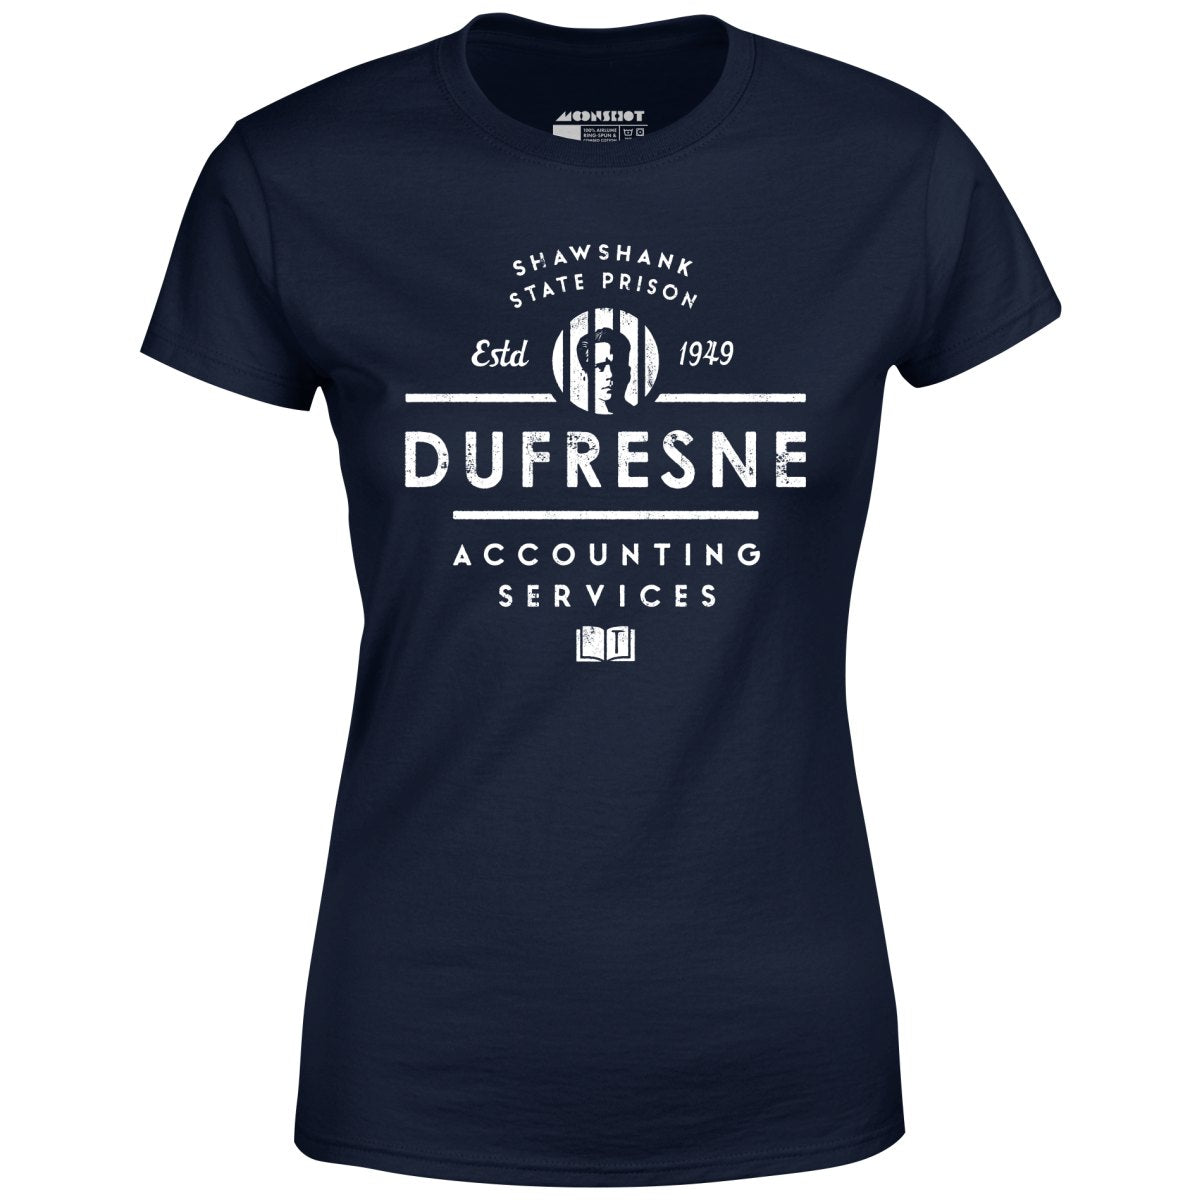 Dufresne Accounting Services - Women's T-Shirt